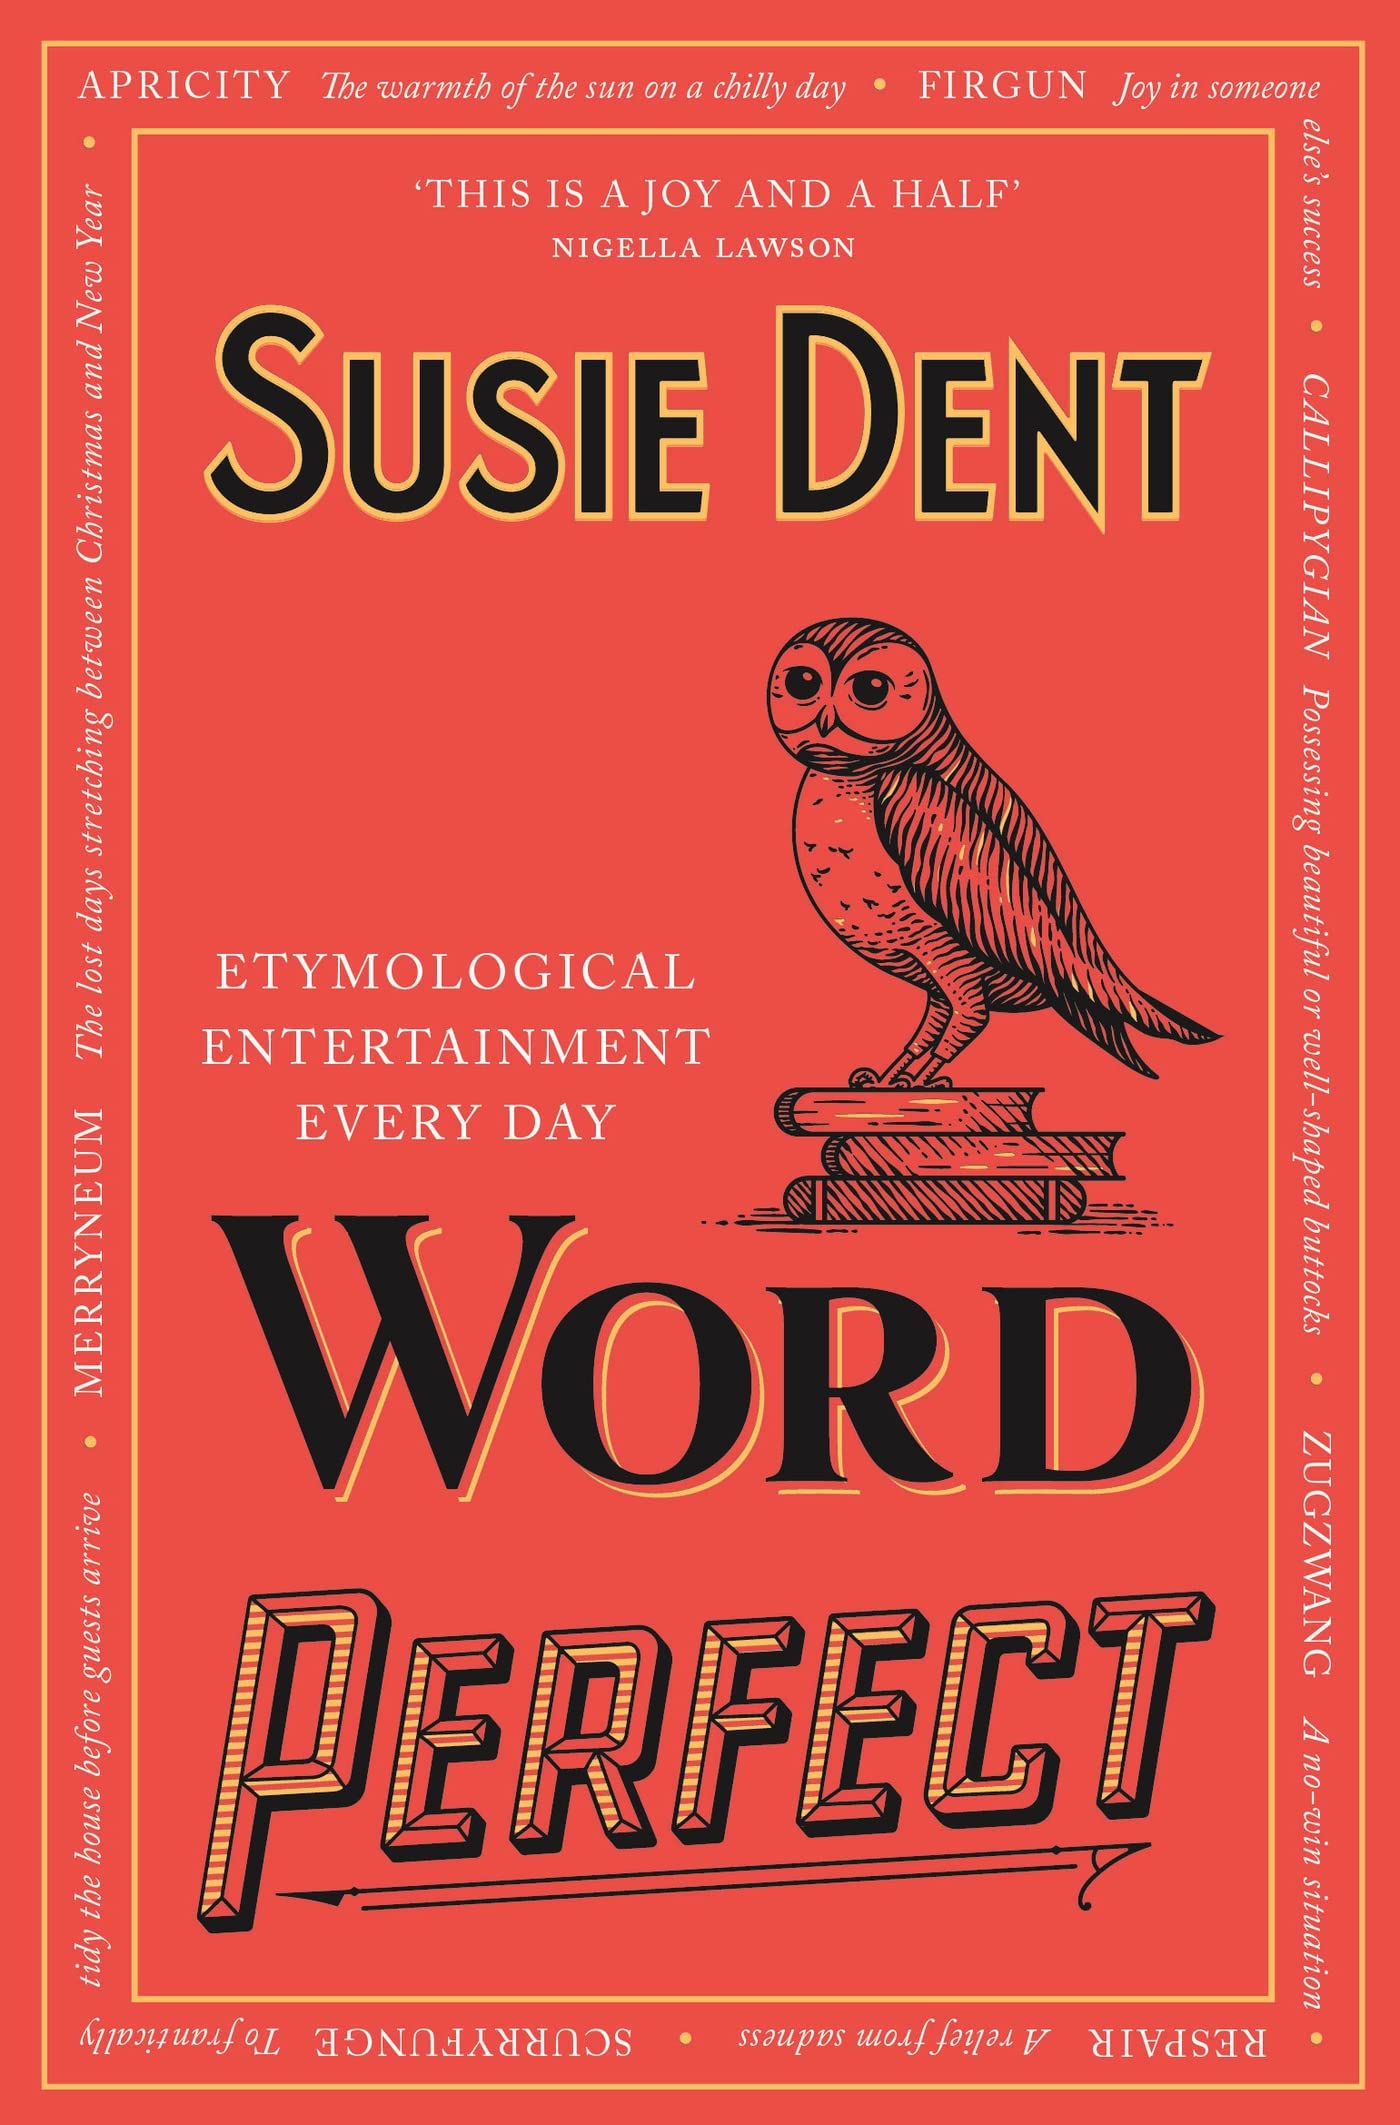 Word Perfect: Etymological Entertainment For Every Day of the Year (eBook) by Susie Dent $0.99